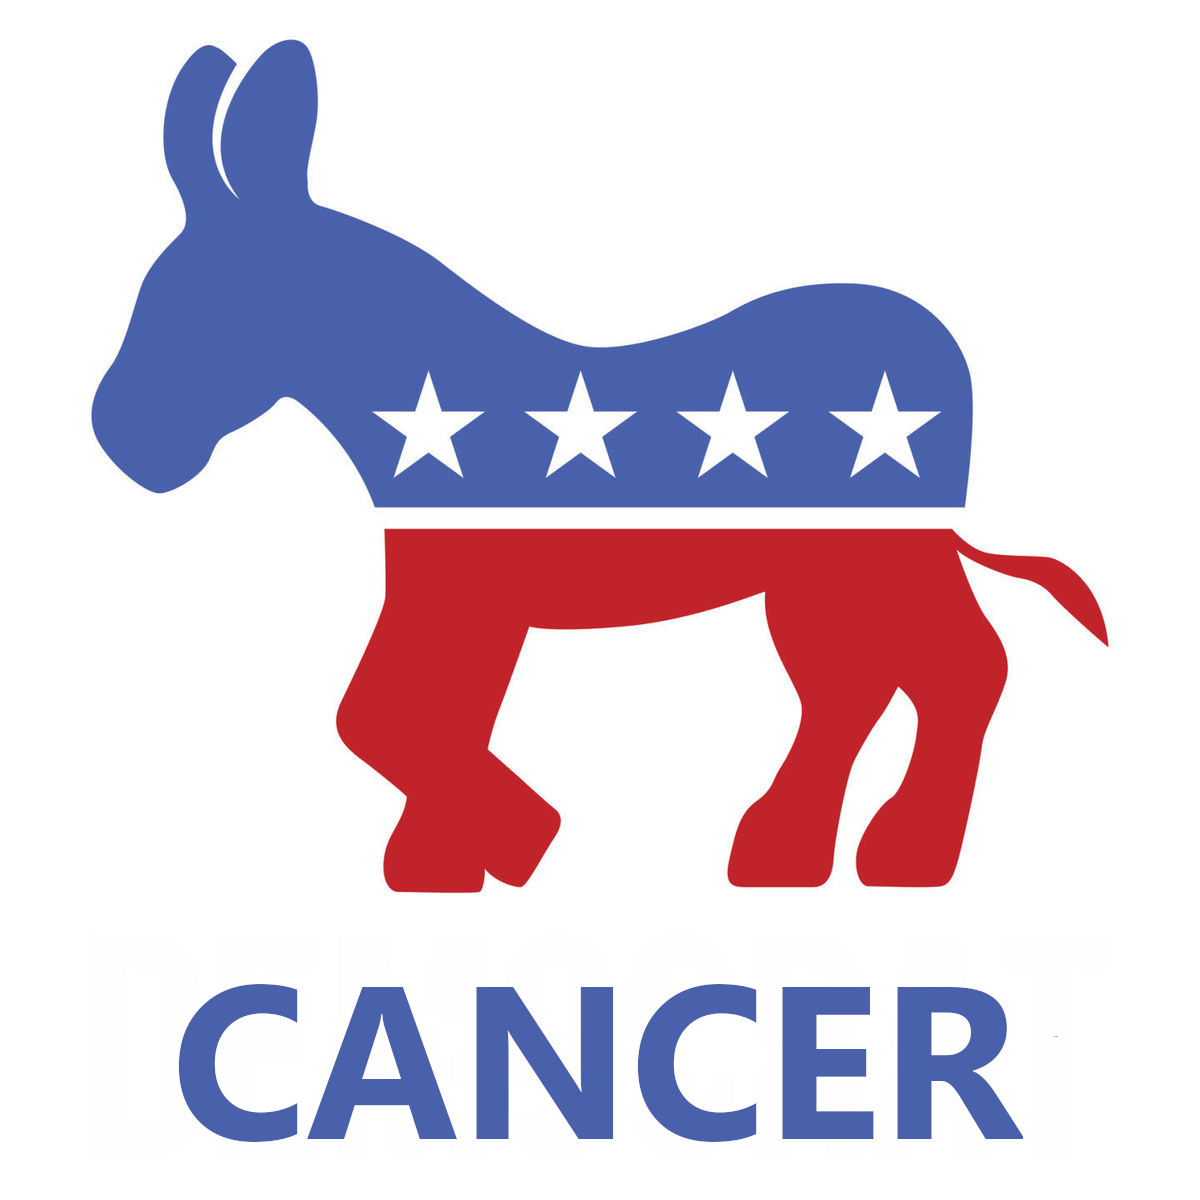 THE DEMOCRATIC PARTY: A party willing and able to trash the office of the presidency of the United States, an office of national and world power that should endure long after we are gone, for the very purpose of 'GETTING TRUMP.' The Democratic Party is a cancer on all of us.